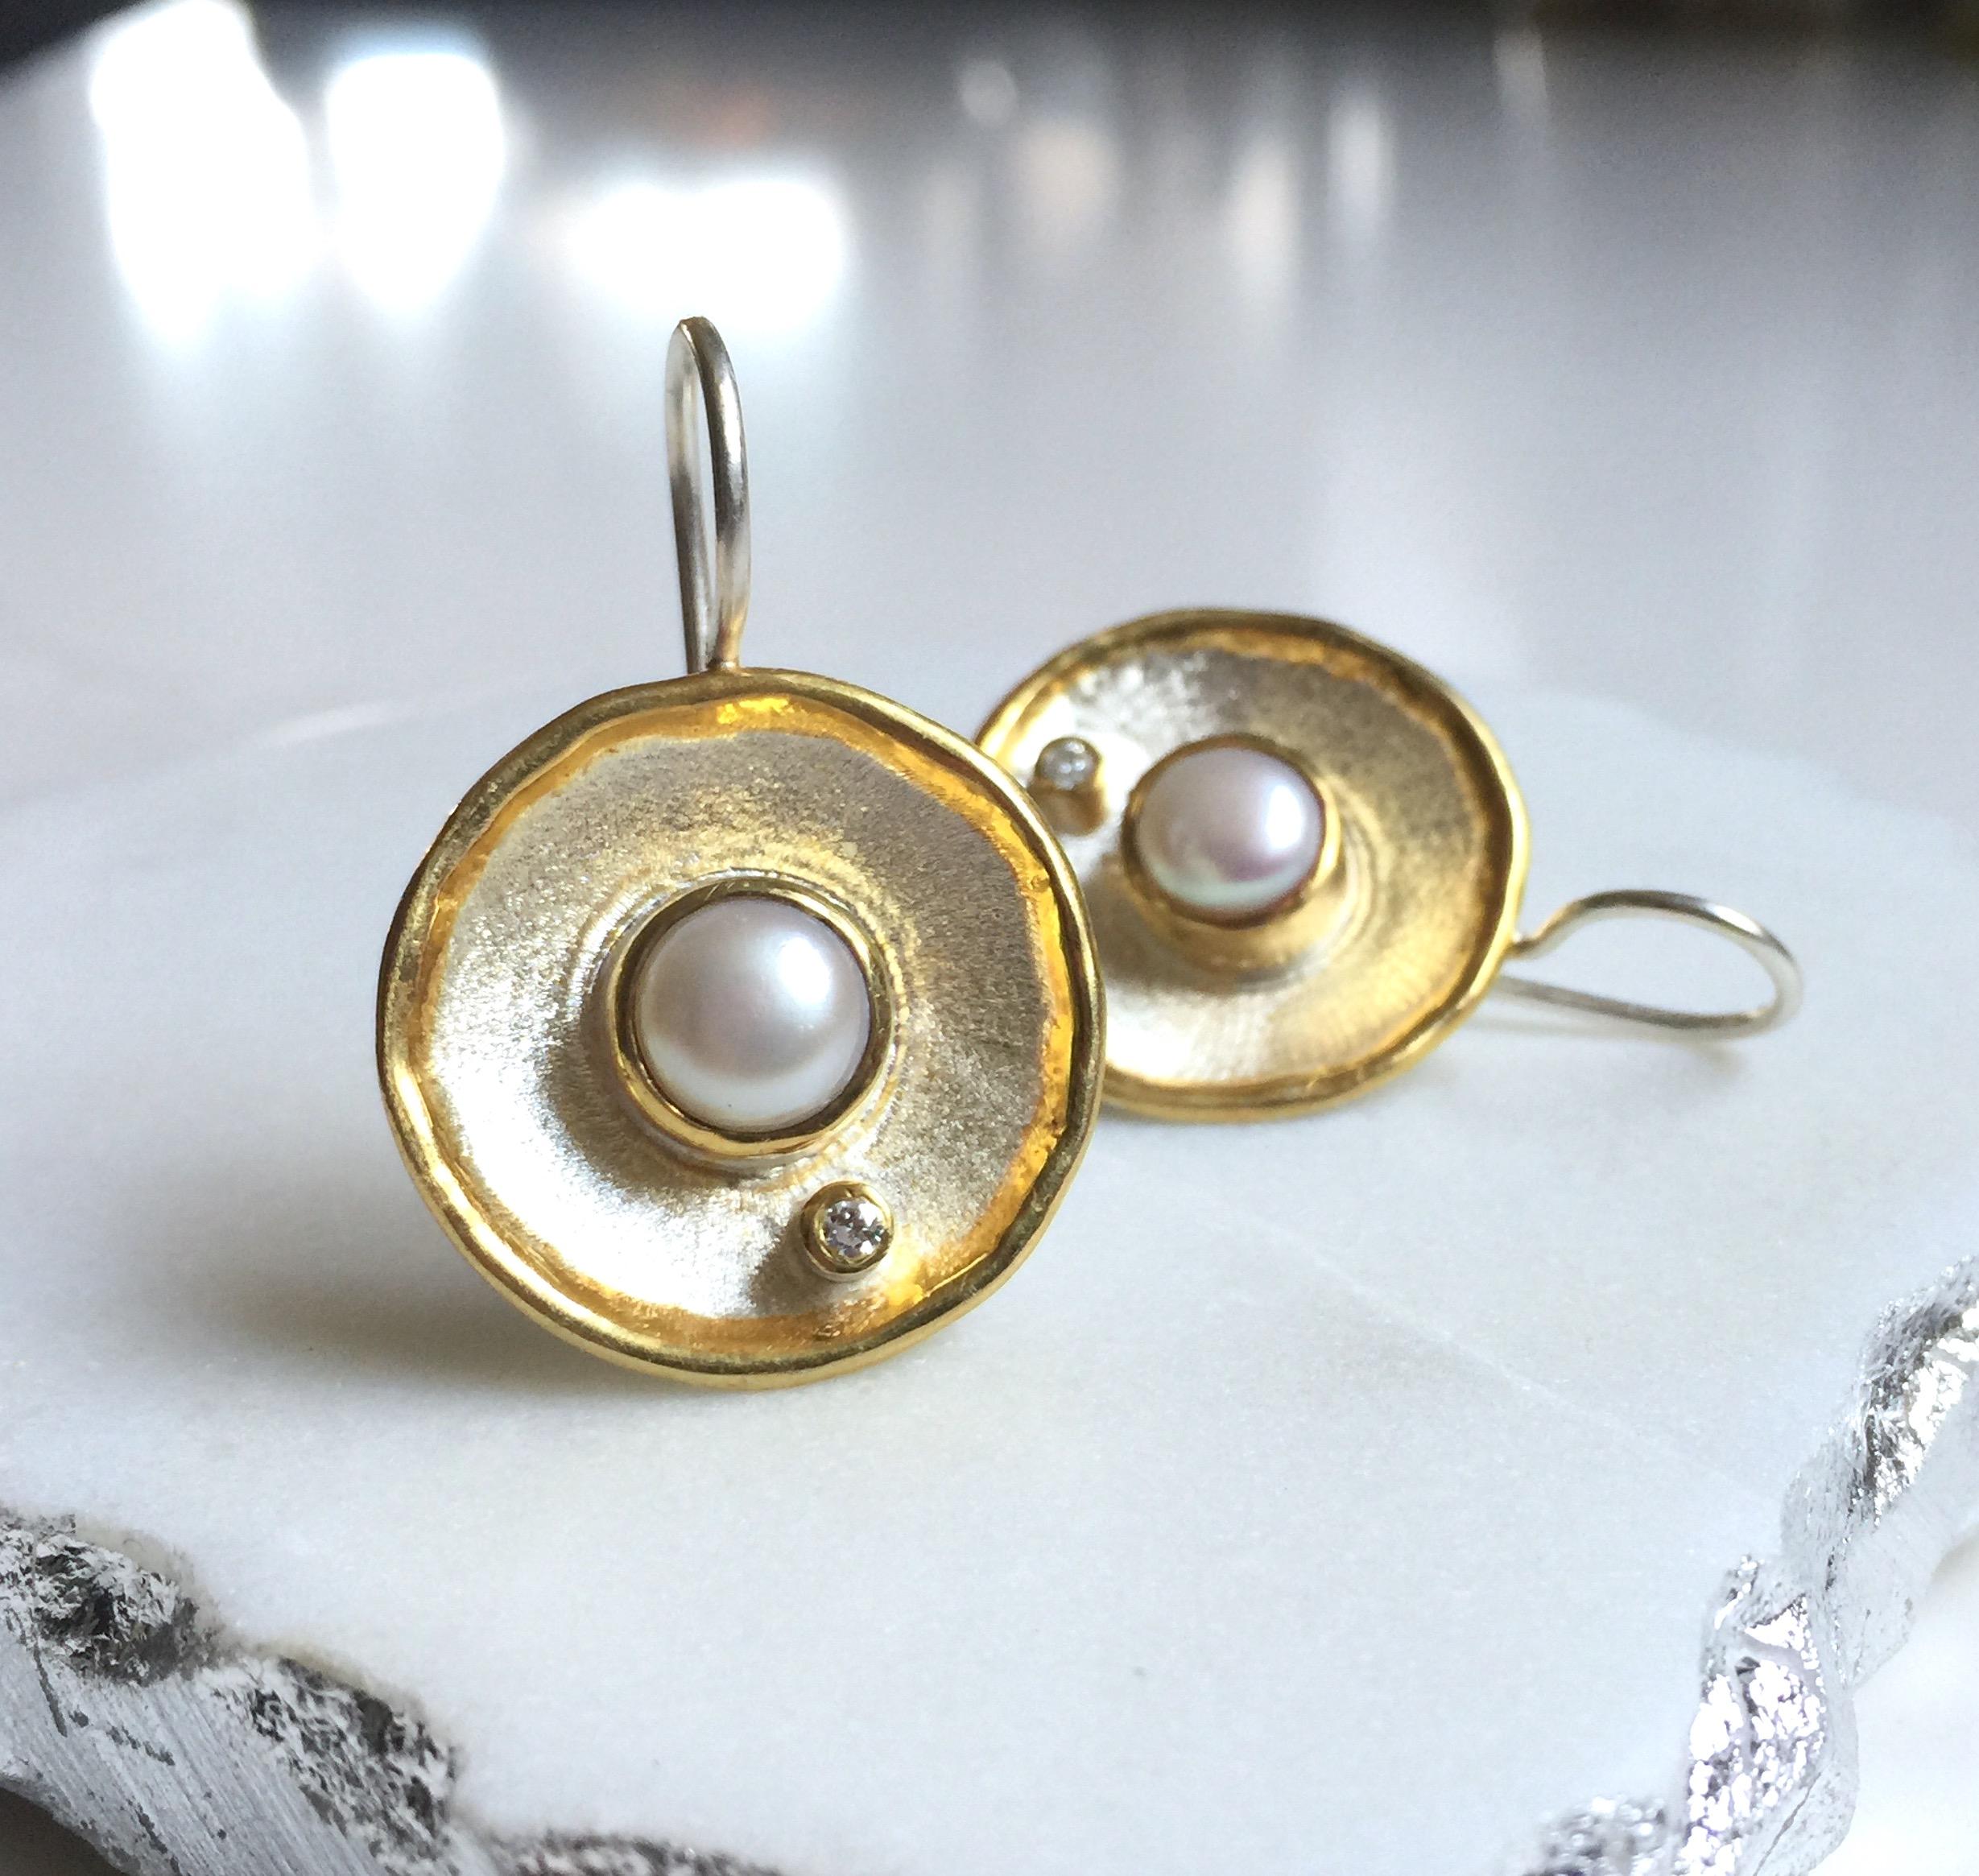 These are Yianni Creations handmade artisan earring from Midas Collection crafted in Greece from fine silver 950 purity and plated with palladium to resist the elements. These round dangle earrings feature 7MM freshwater pearl accompanied by 0.03